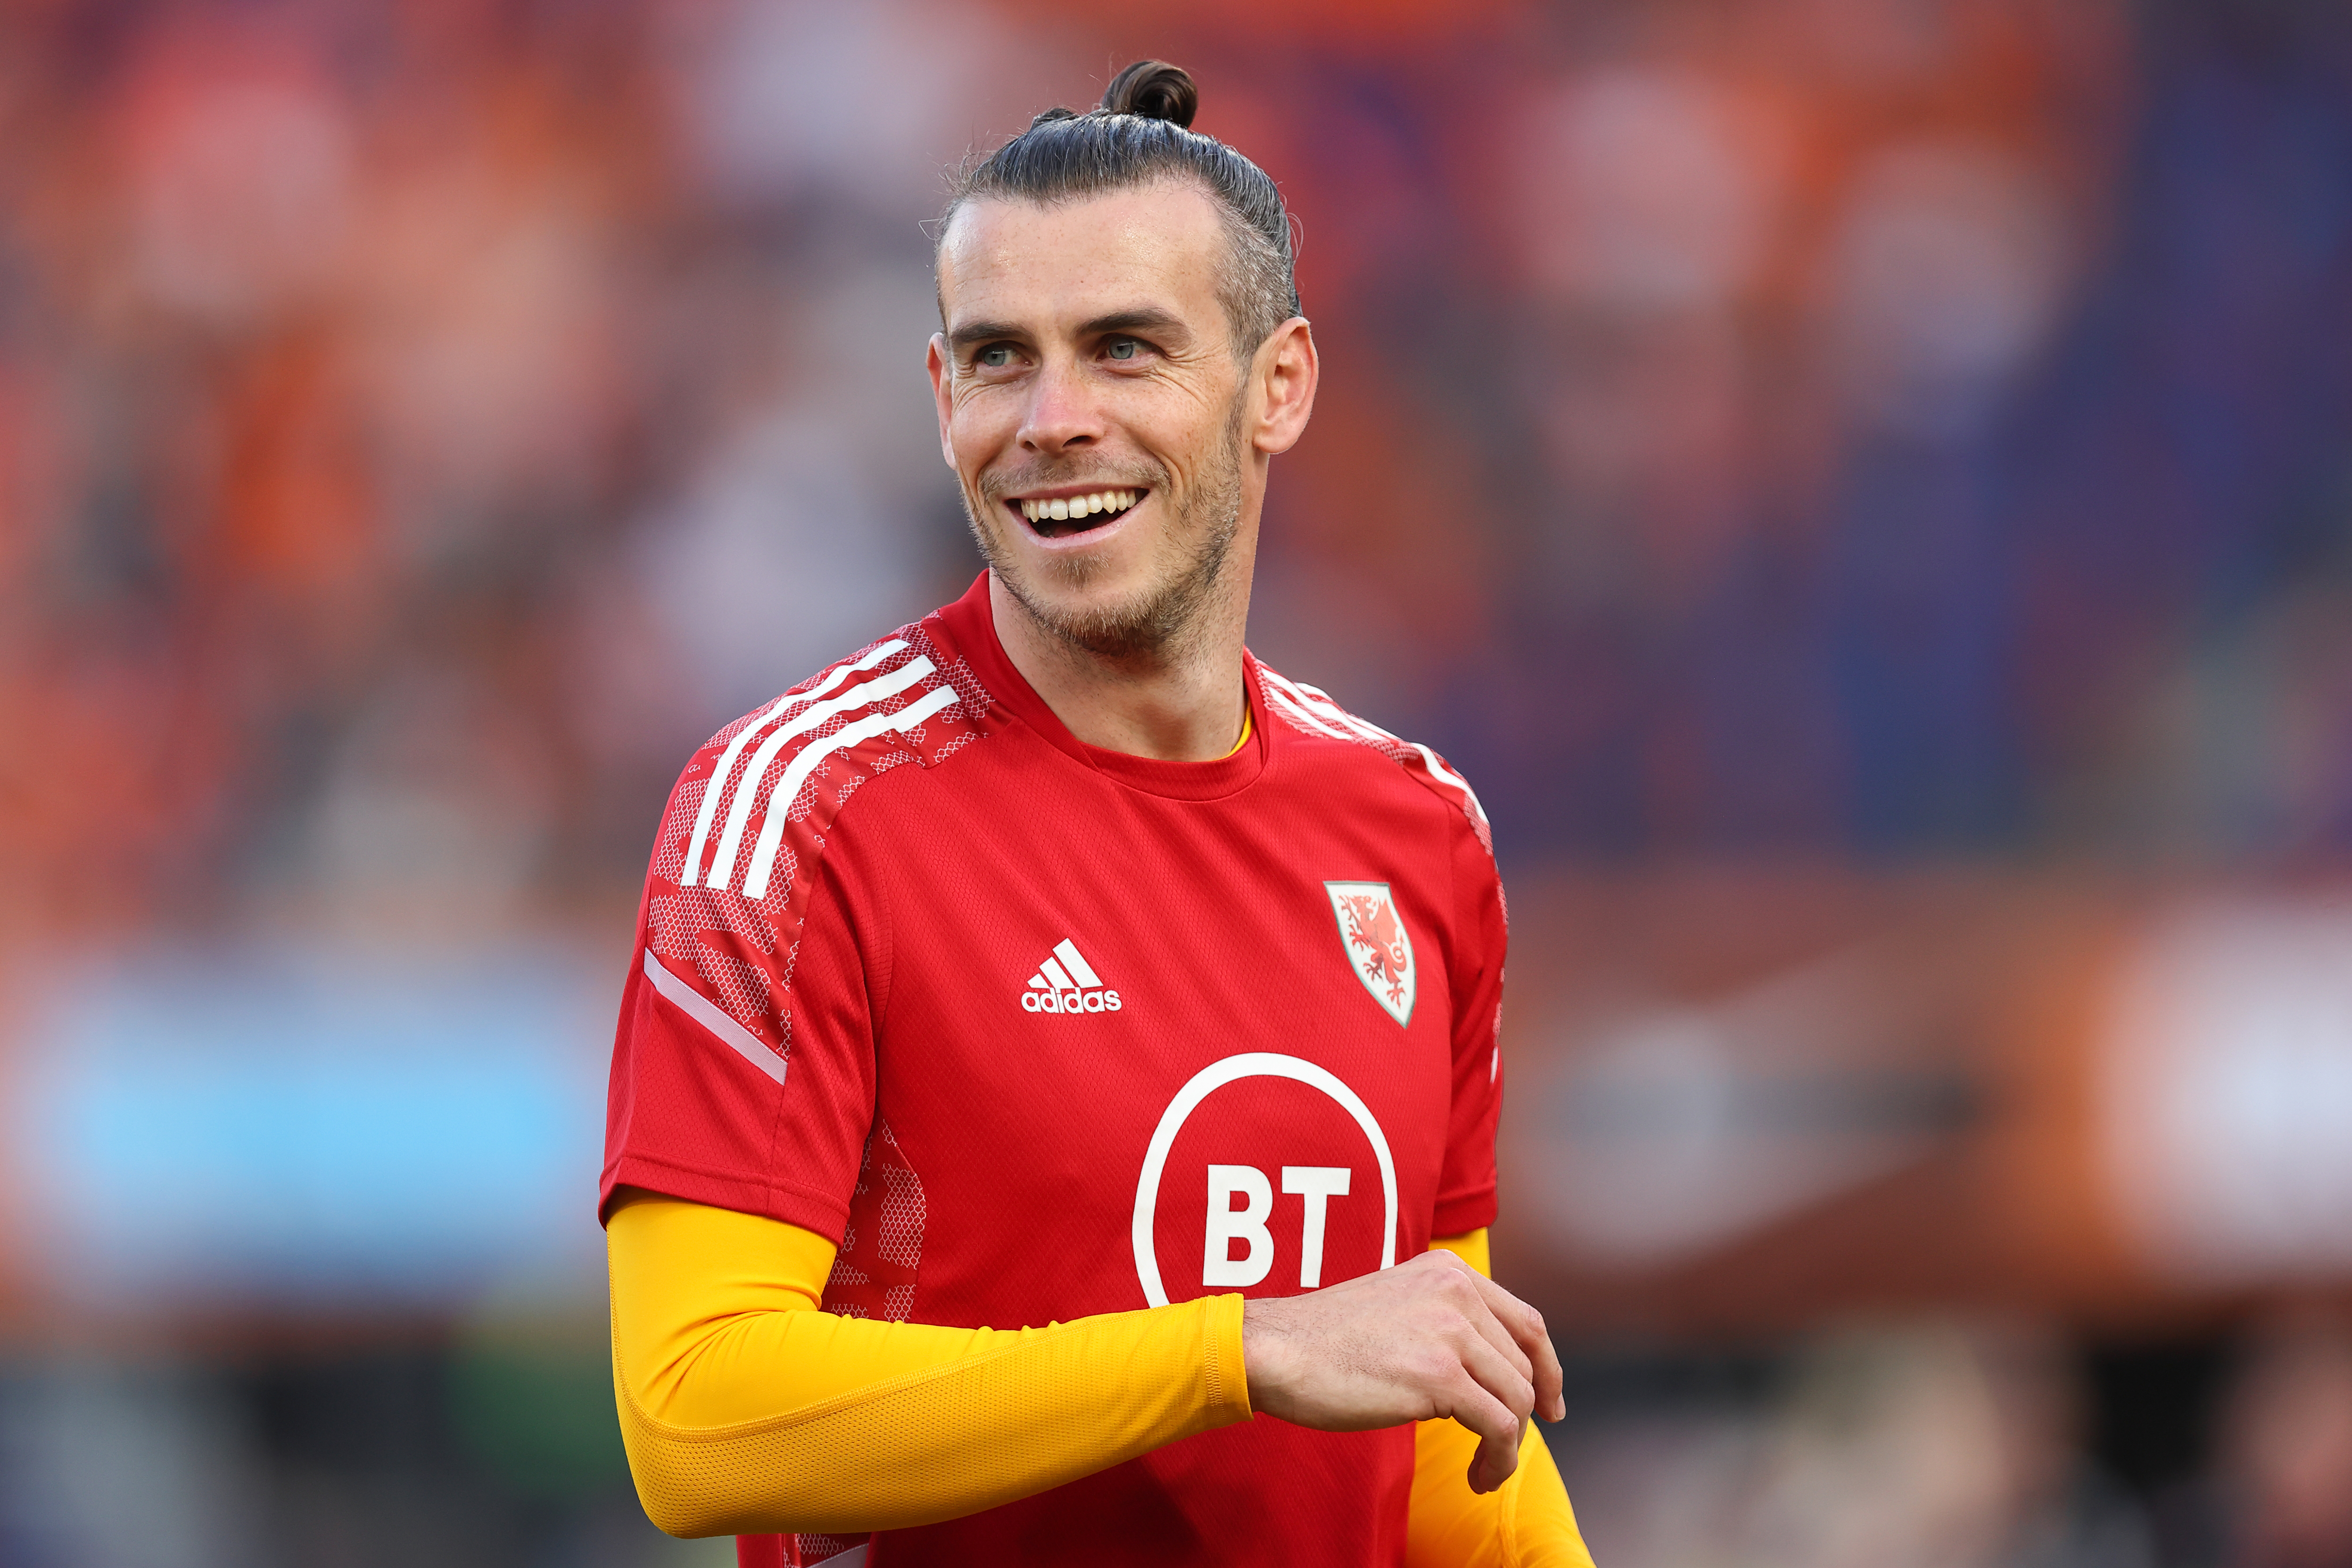 LAFC And Gareth Bale Win 2022 MLS Cup